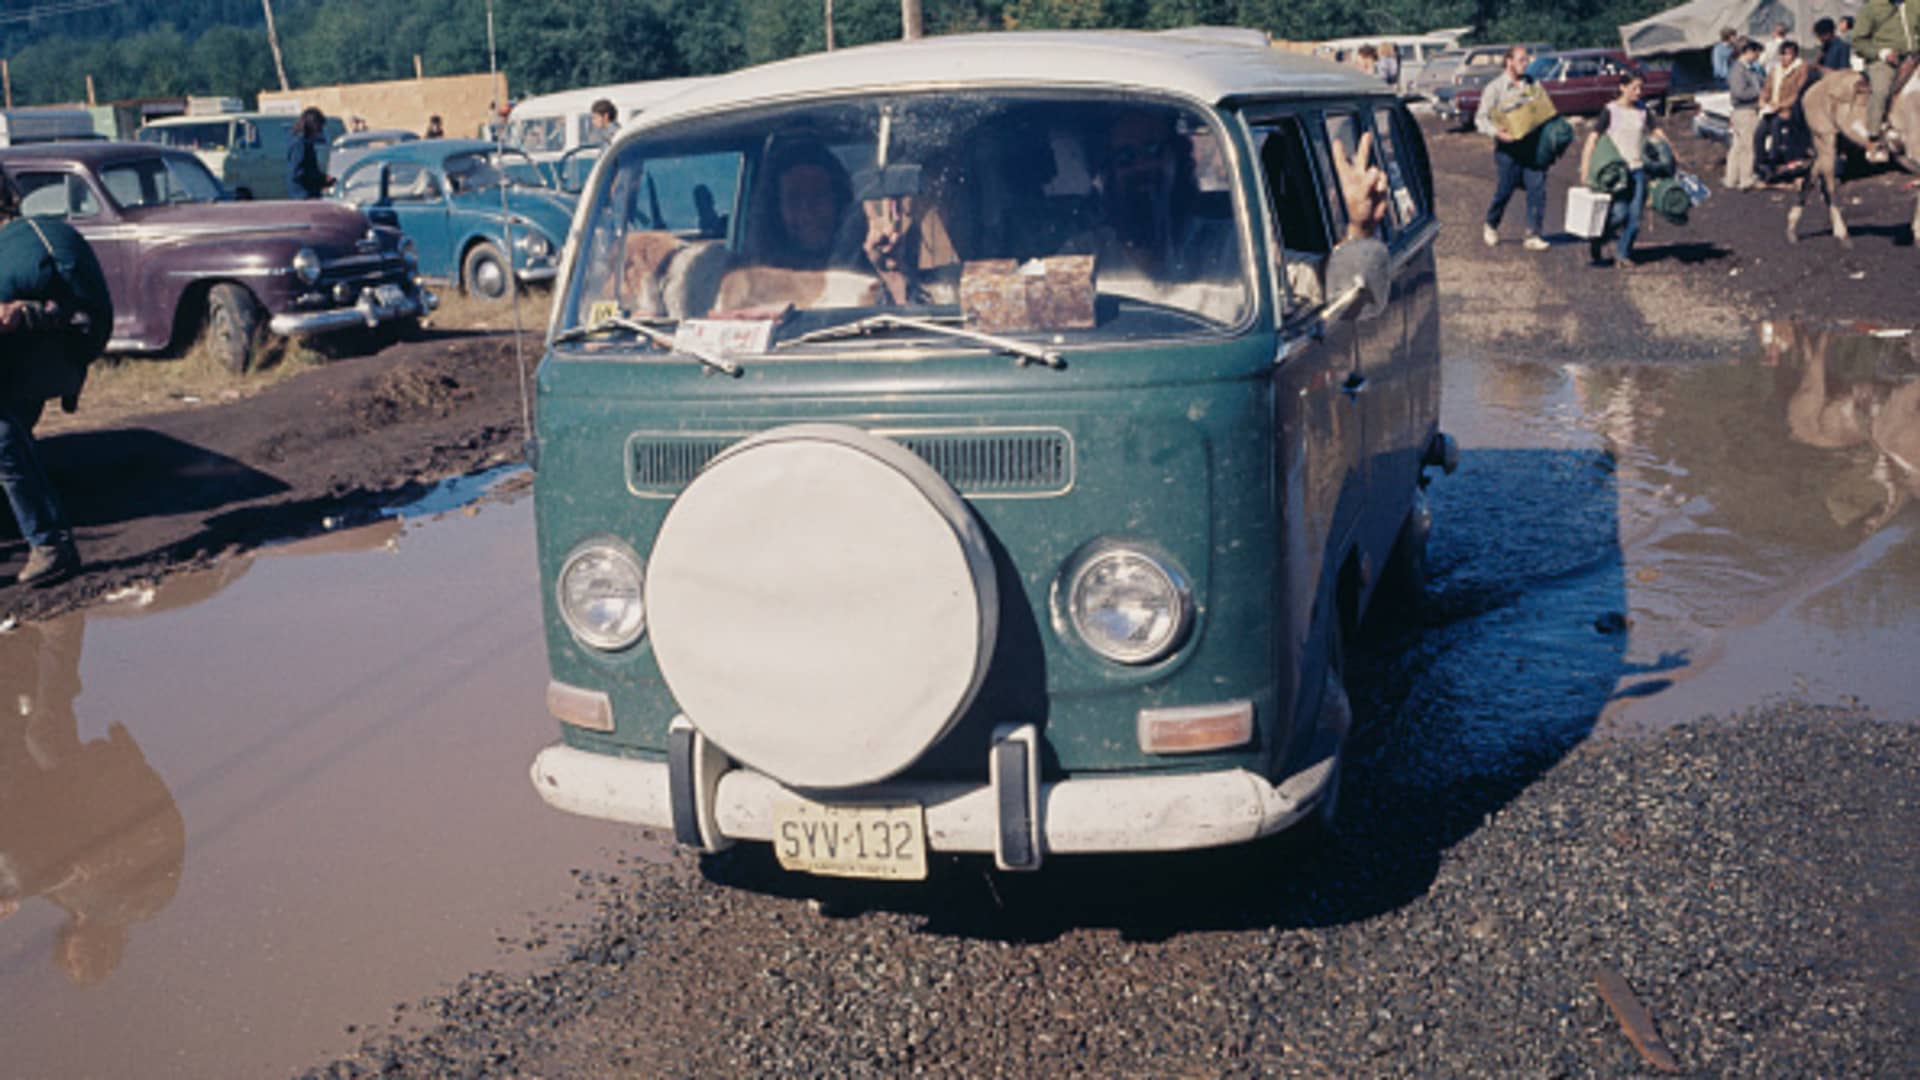 This image, from 1970, shows people driving a version of the Volkswagen Microbus at a rock festival in Oregon.